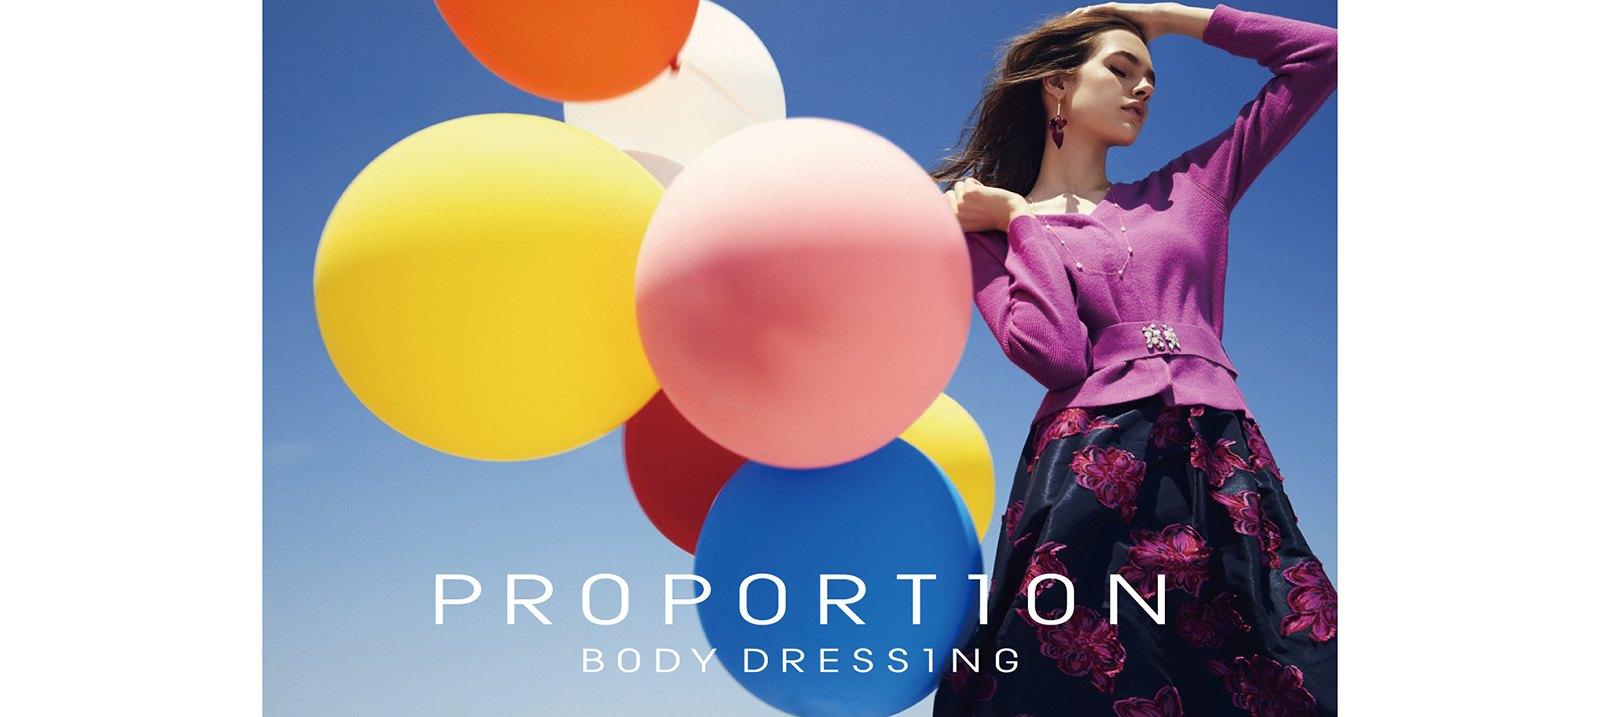 PROPORTION BODY DRESSING